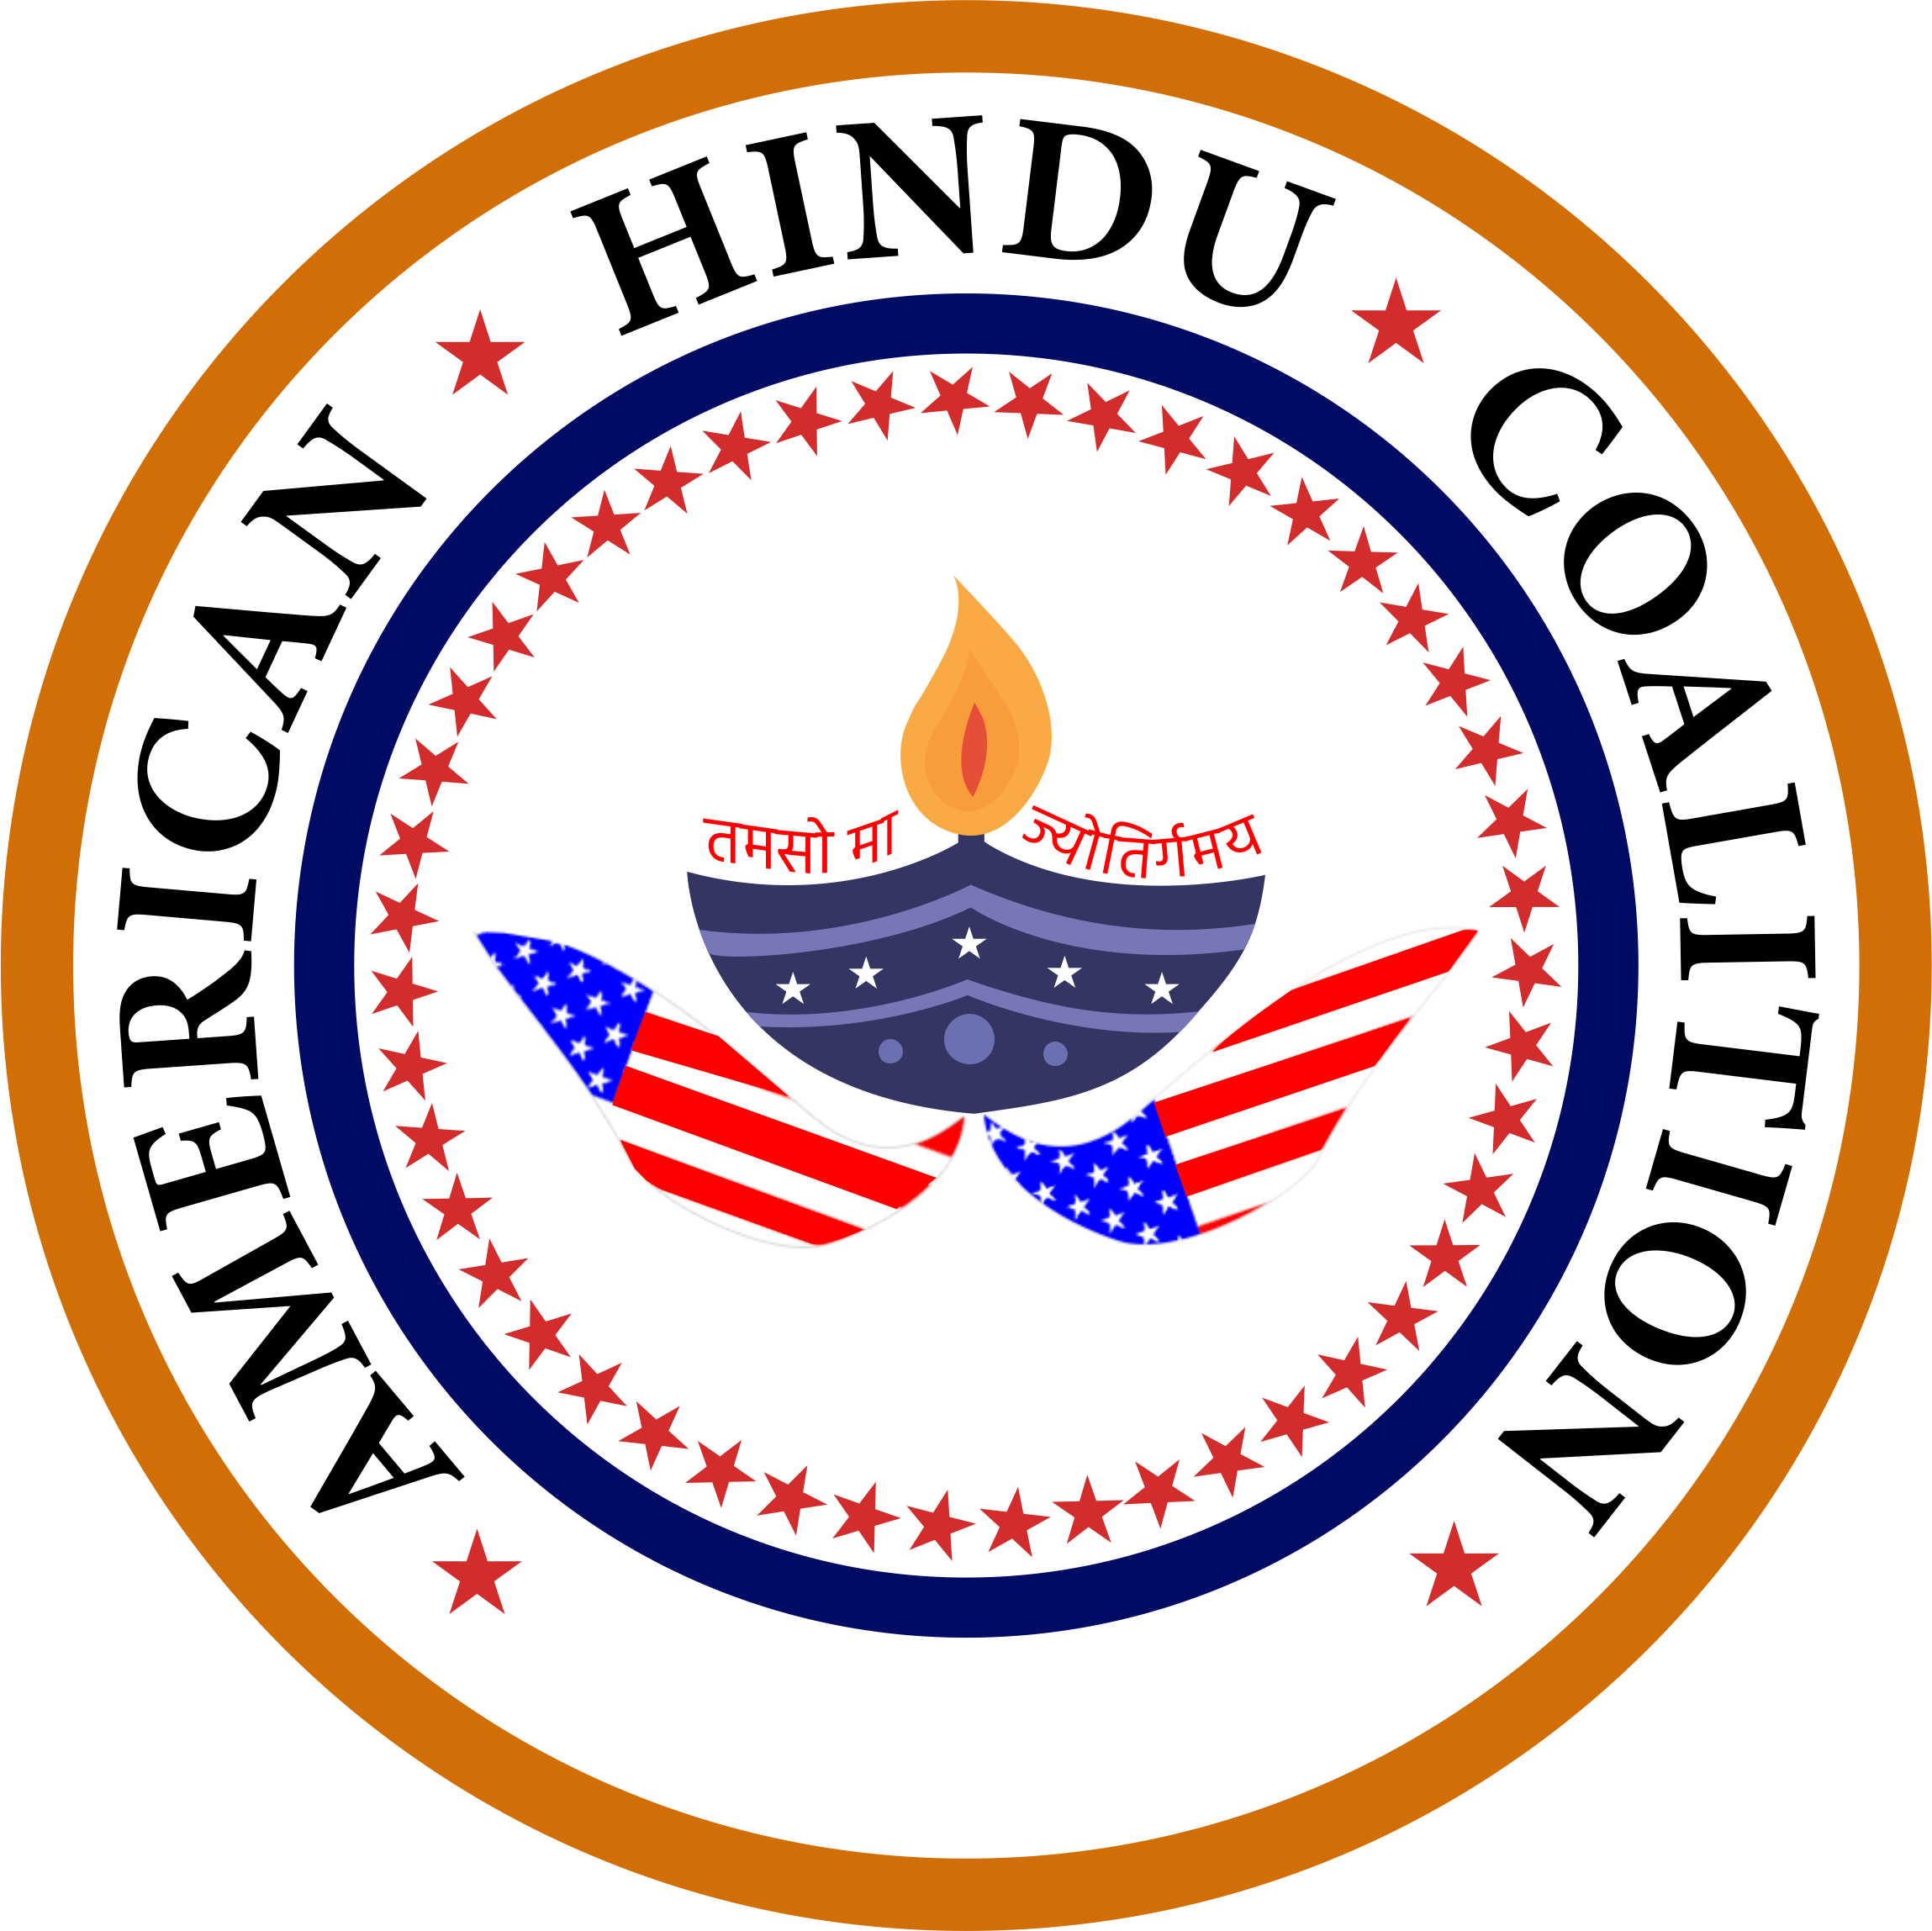 AMERICAN HINDU COALITION COMPLAINT LAUNCHES MAJOR CIVIL RIGHTS INVESTIGATION OF SYSTEMIC RACISM BY THE FAIRFAX COUNTY SCHOOL BOARD AGAINST INDIAN AMERICAN STUDENTS